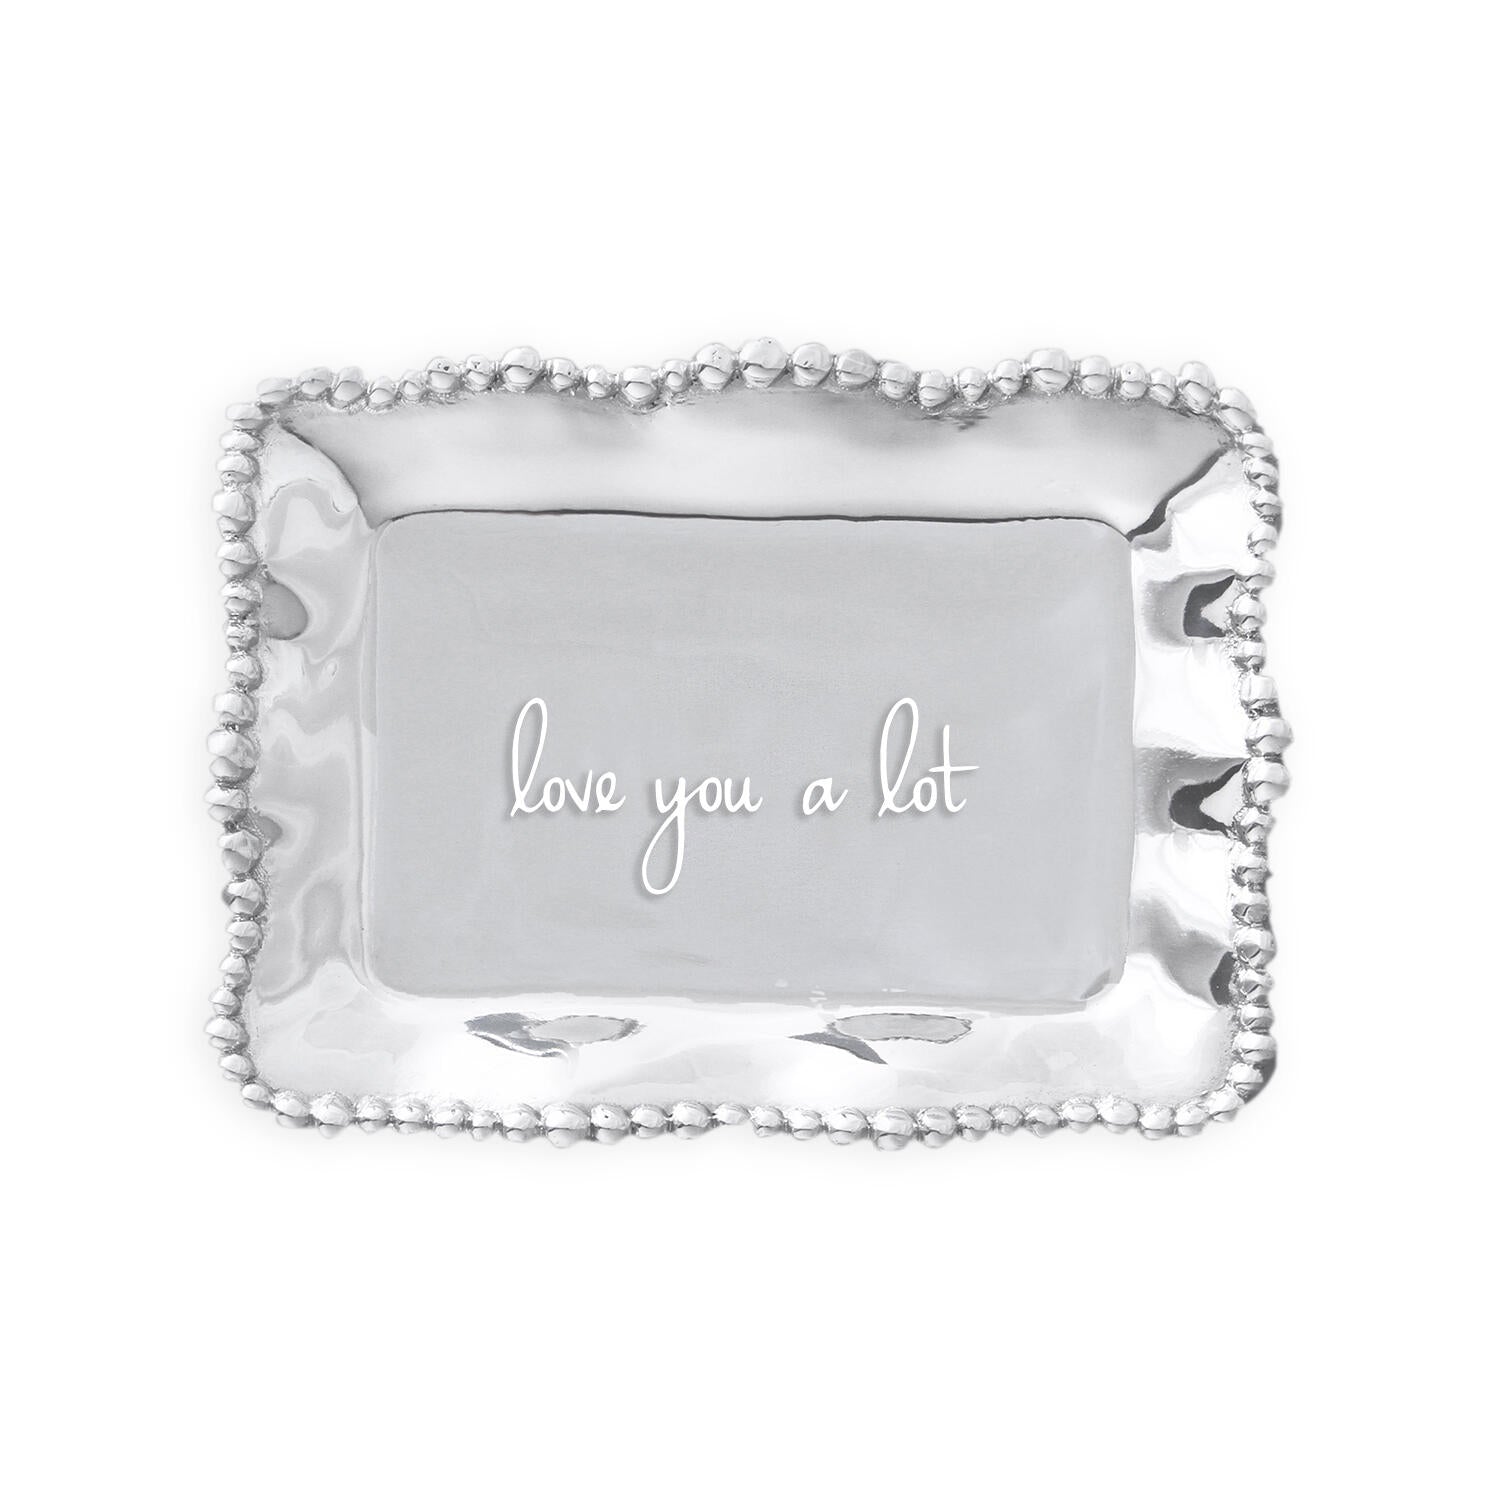 GIFTABLES Organic Pearl Rectangular Engraved Tray - love you a lot